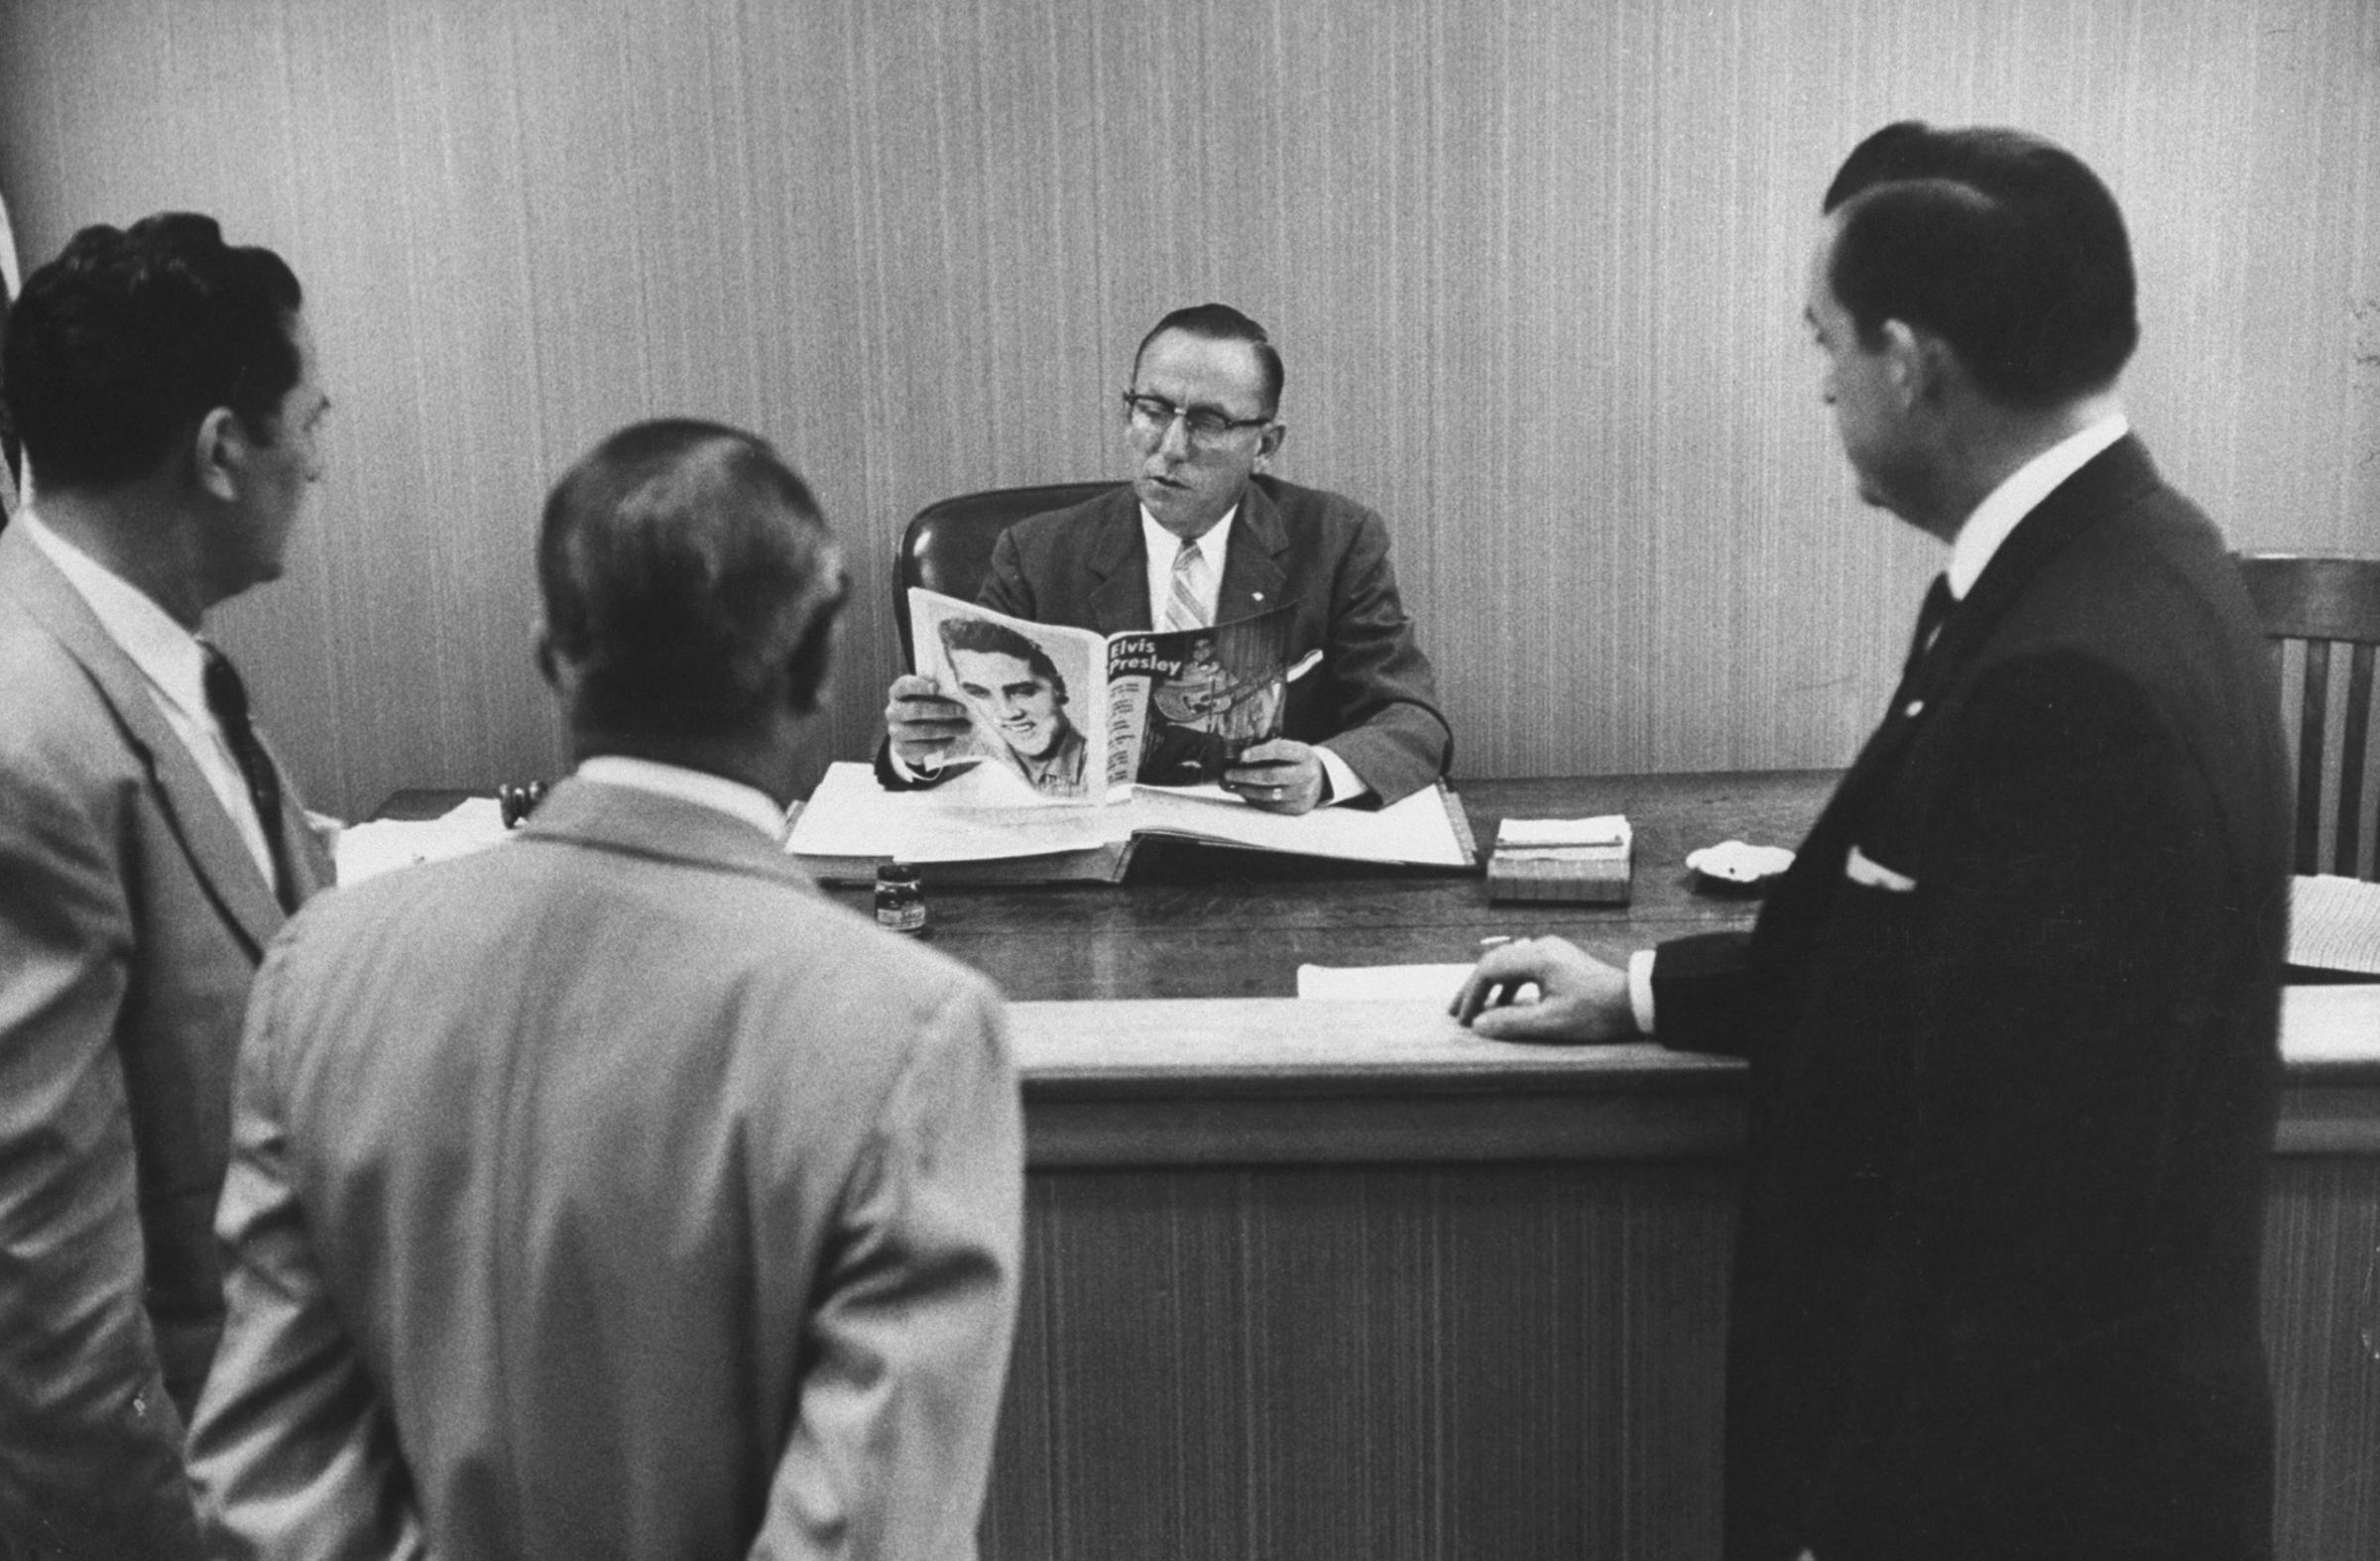 Civic leaders meet with a Jacksonville, Fla. judge to discuss ways of "curbing" Elvis Presley's influence on local teens, 1956.